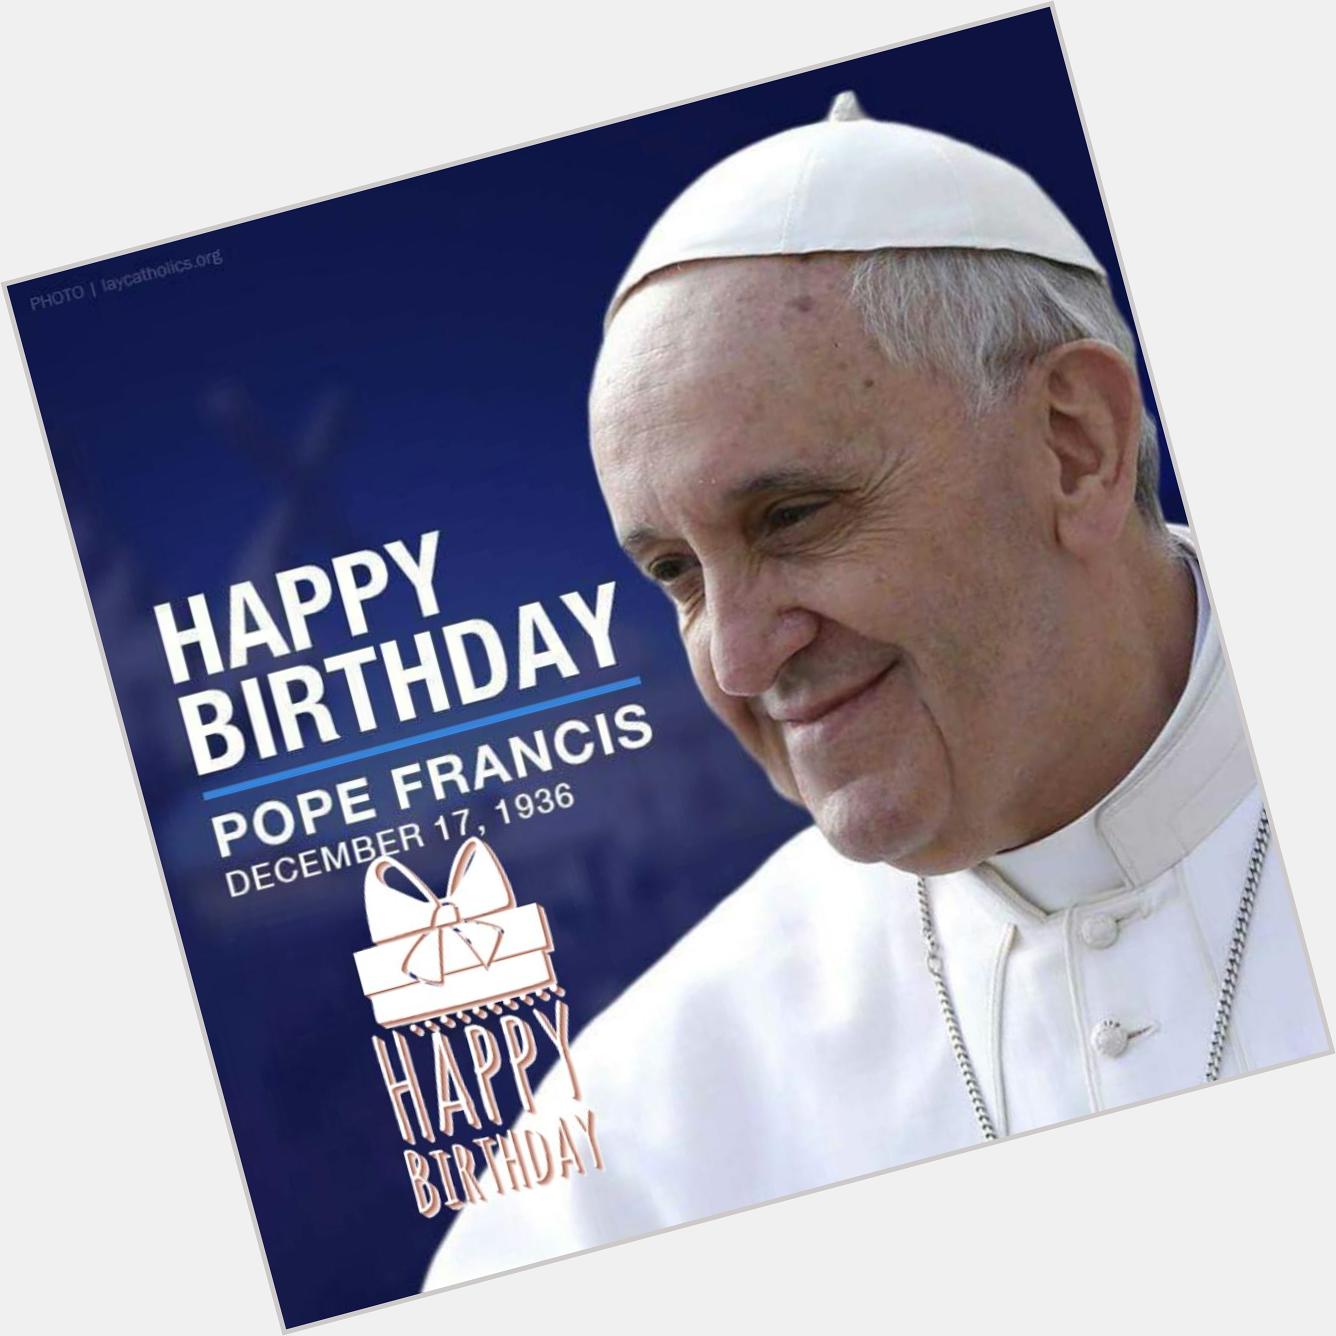 Happy Birthday Pope Francis!   See you next month!... 